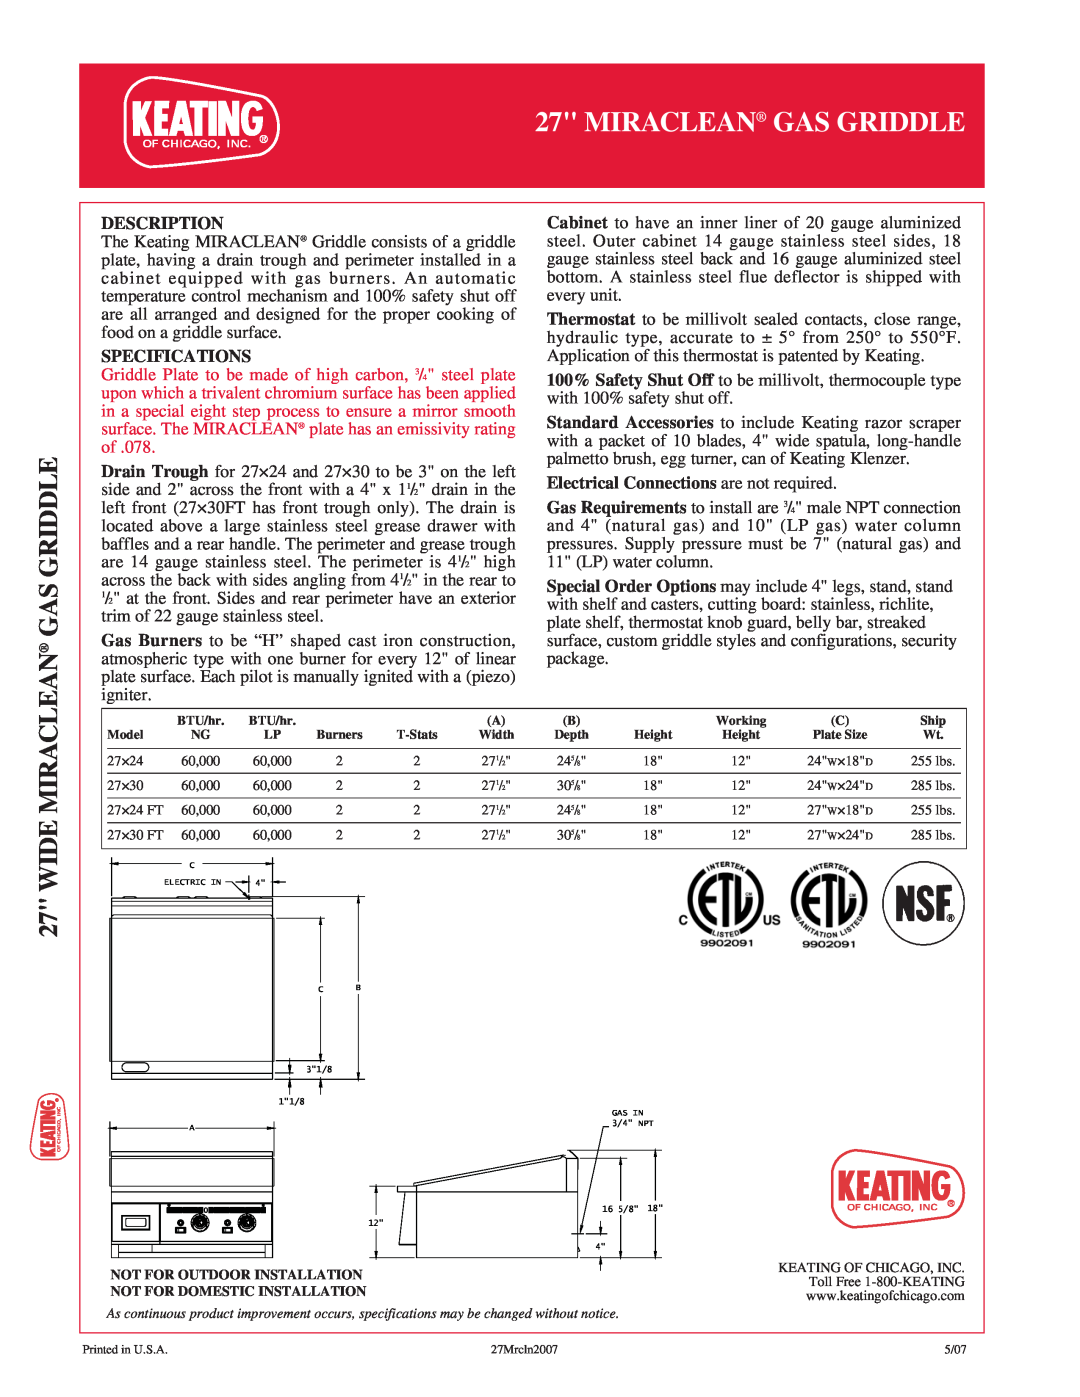 Keating Of Chicago 27 manual Wide Miraclean, Miraclean Gas Griddle, Description, Specifications 